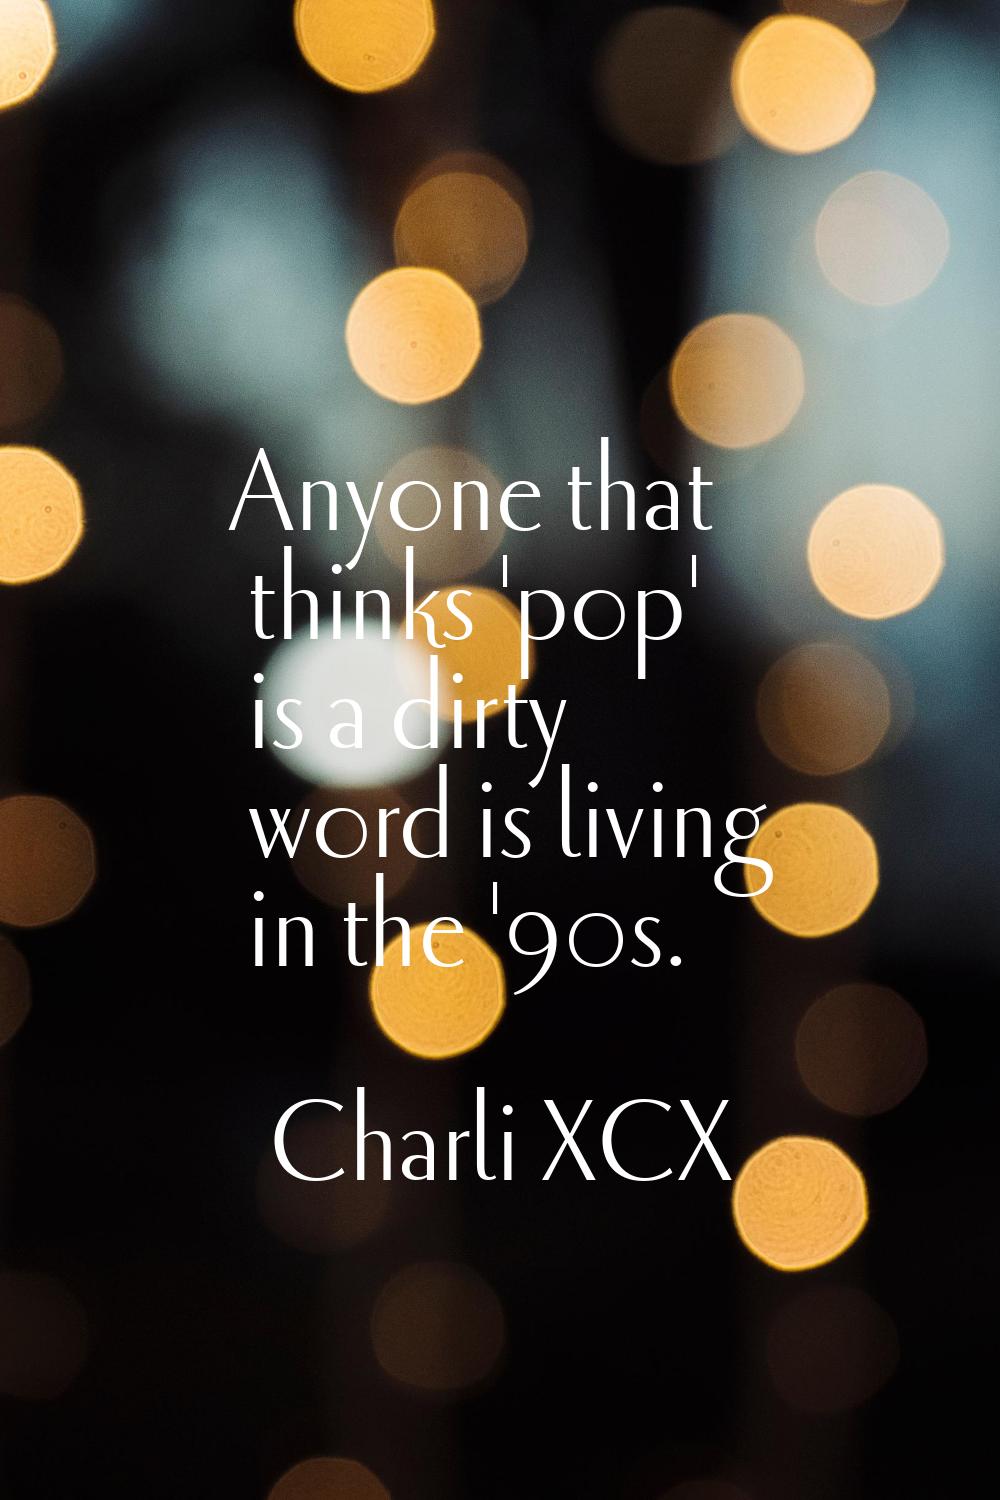 Anyone that thinks 'pop' is a dirty word is living in the '90s.